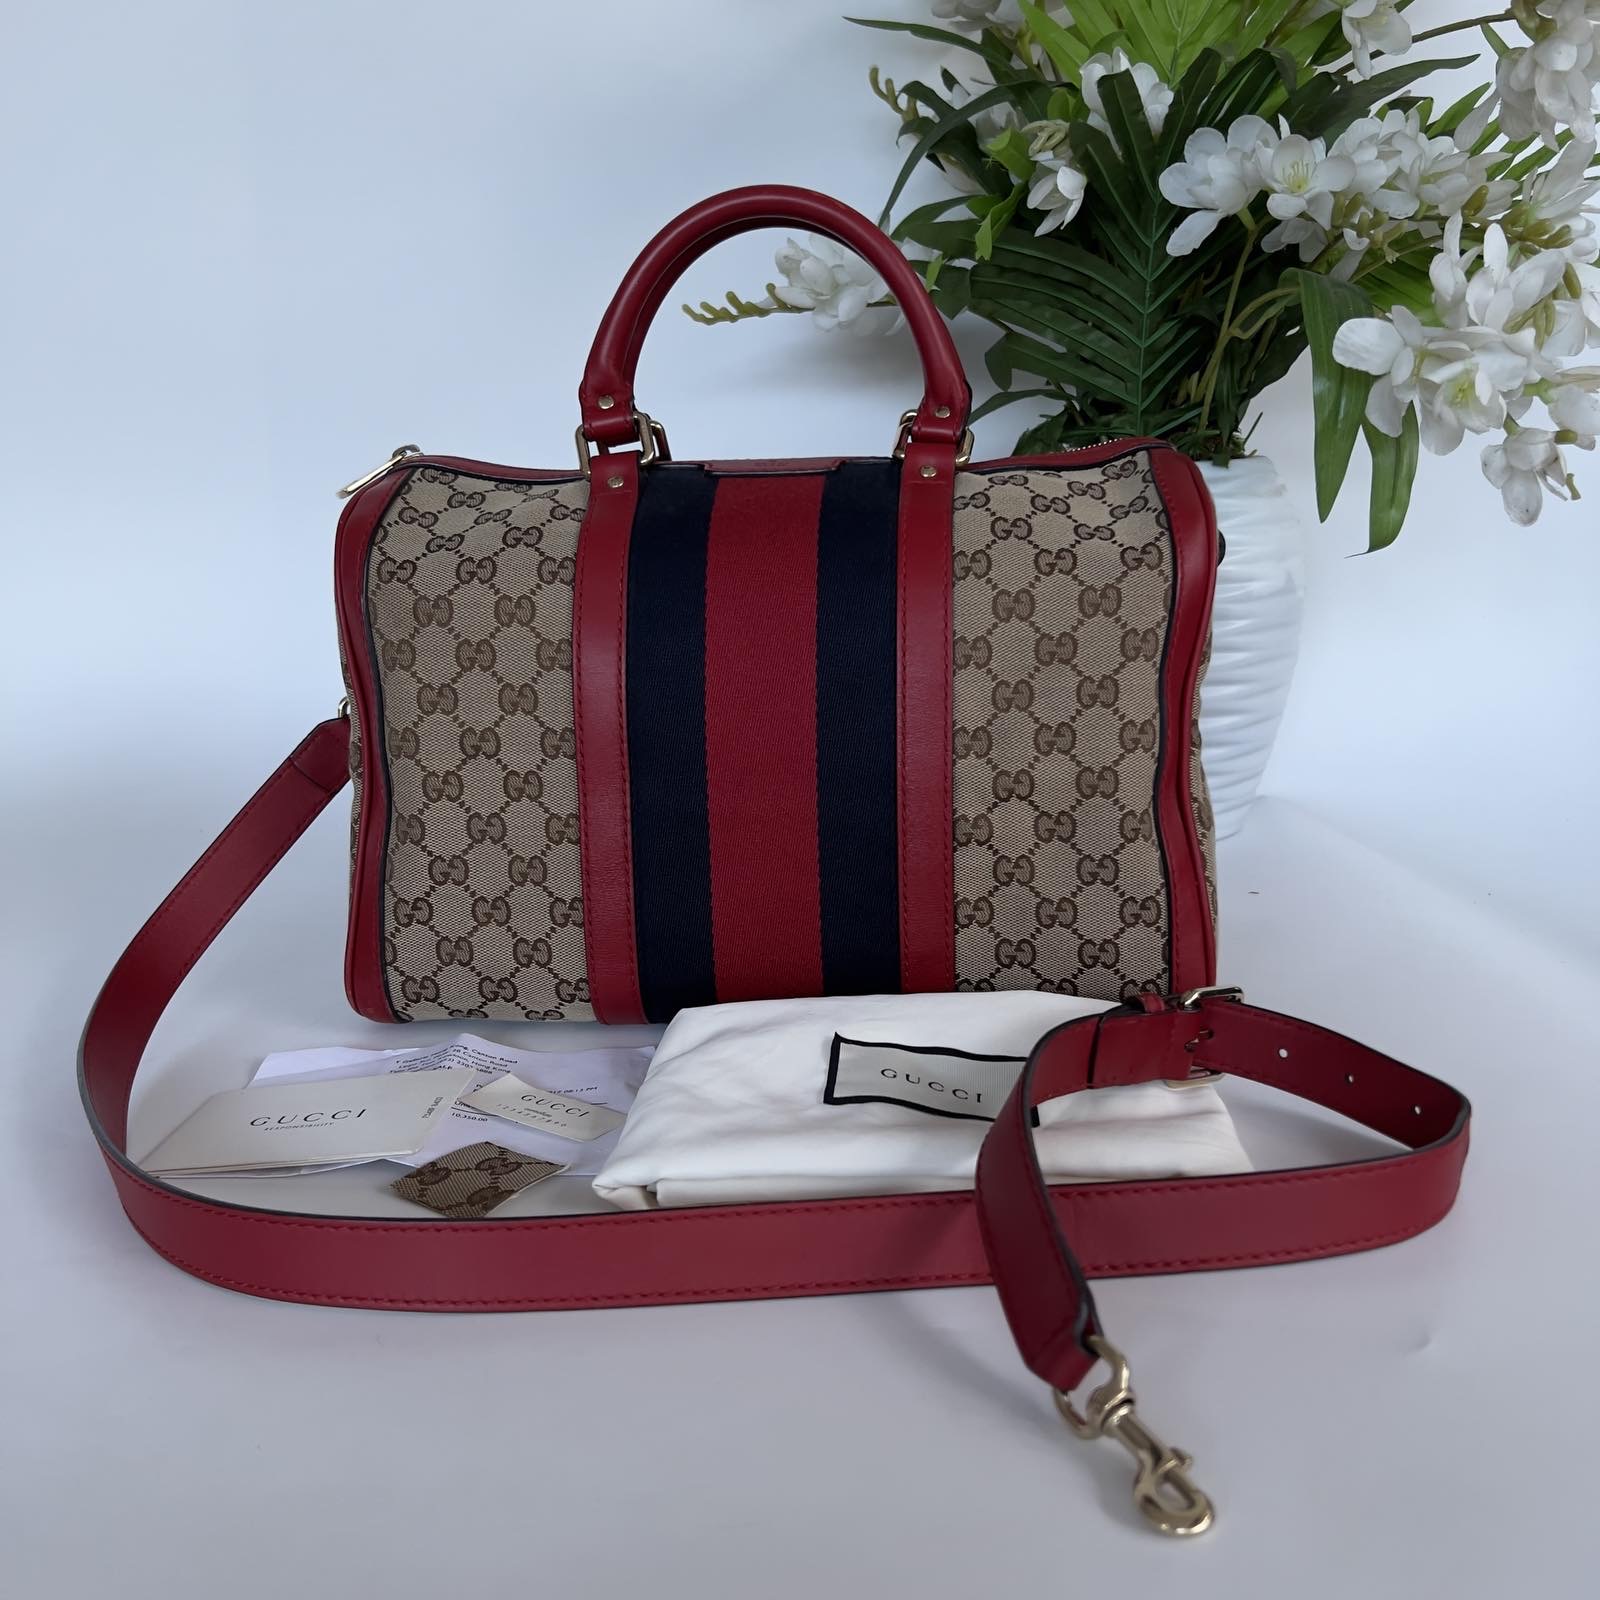 Gucci Monogram Canvas Web Boston Red Trims Two Way Bag. Made in Italy. With  cards, swatch, dustbag, long strap & bag organizer ❤️